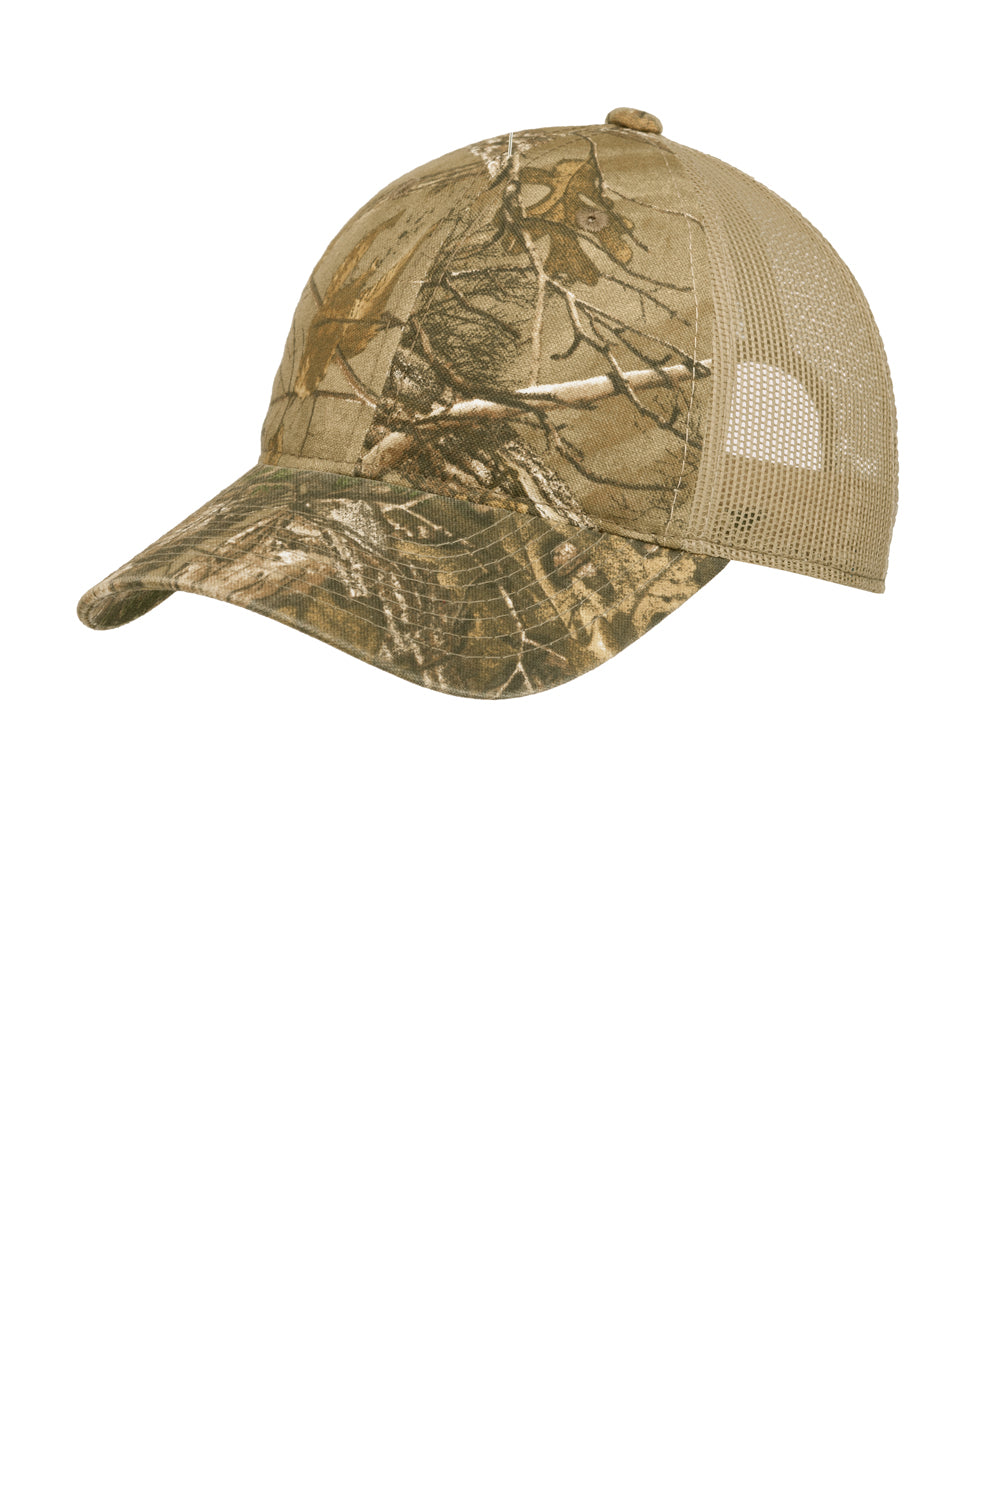 Port Authority C929 Mens Camouflage Mesh Back Hat Realtree Xtra/Tan Front